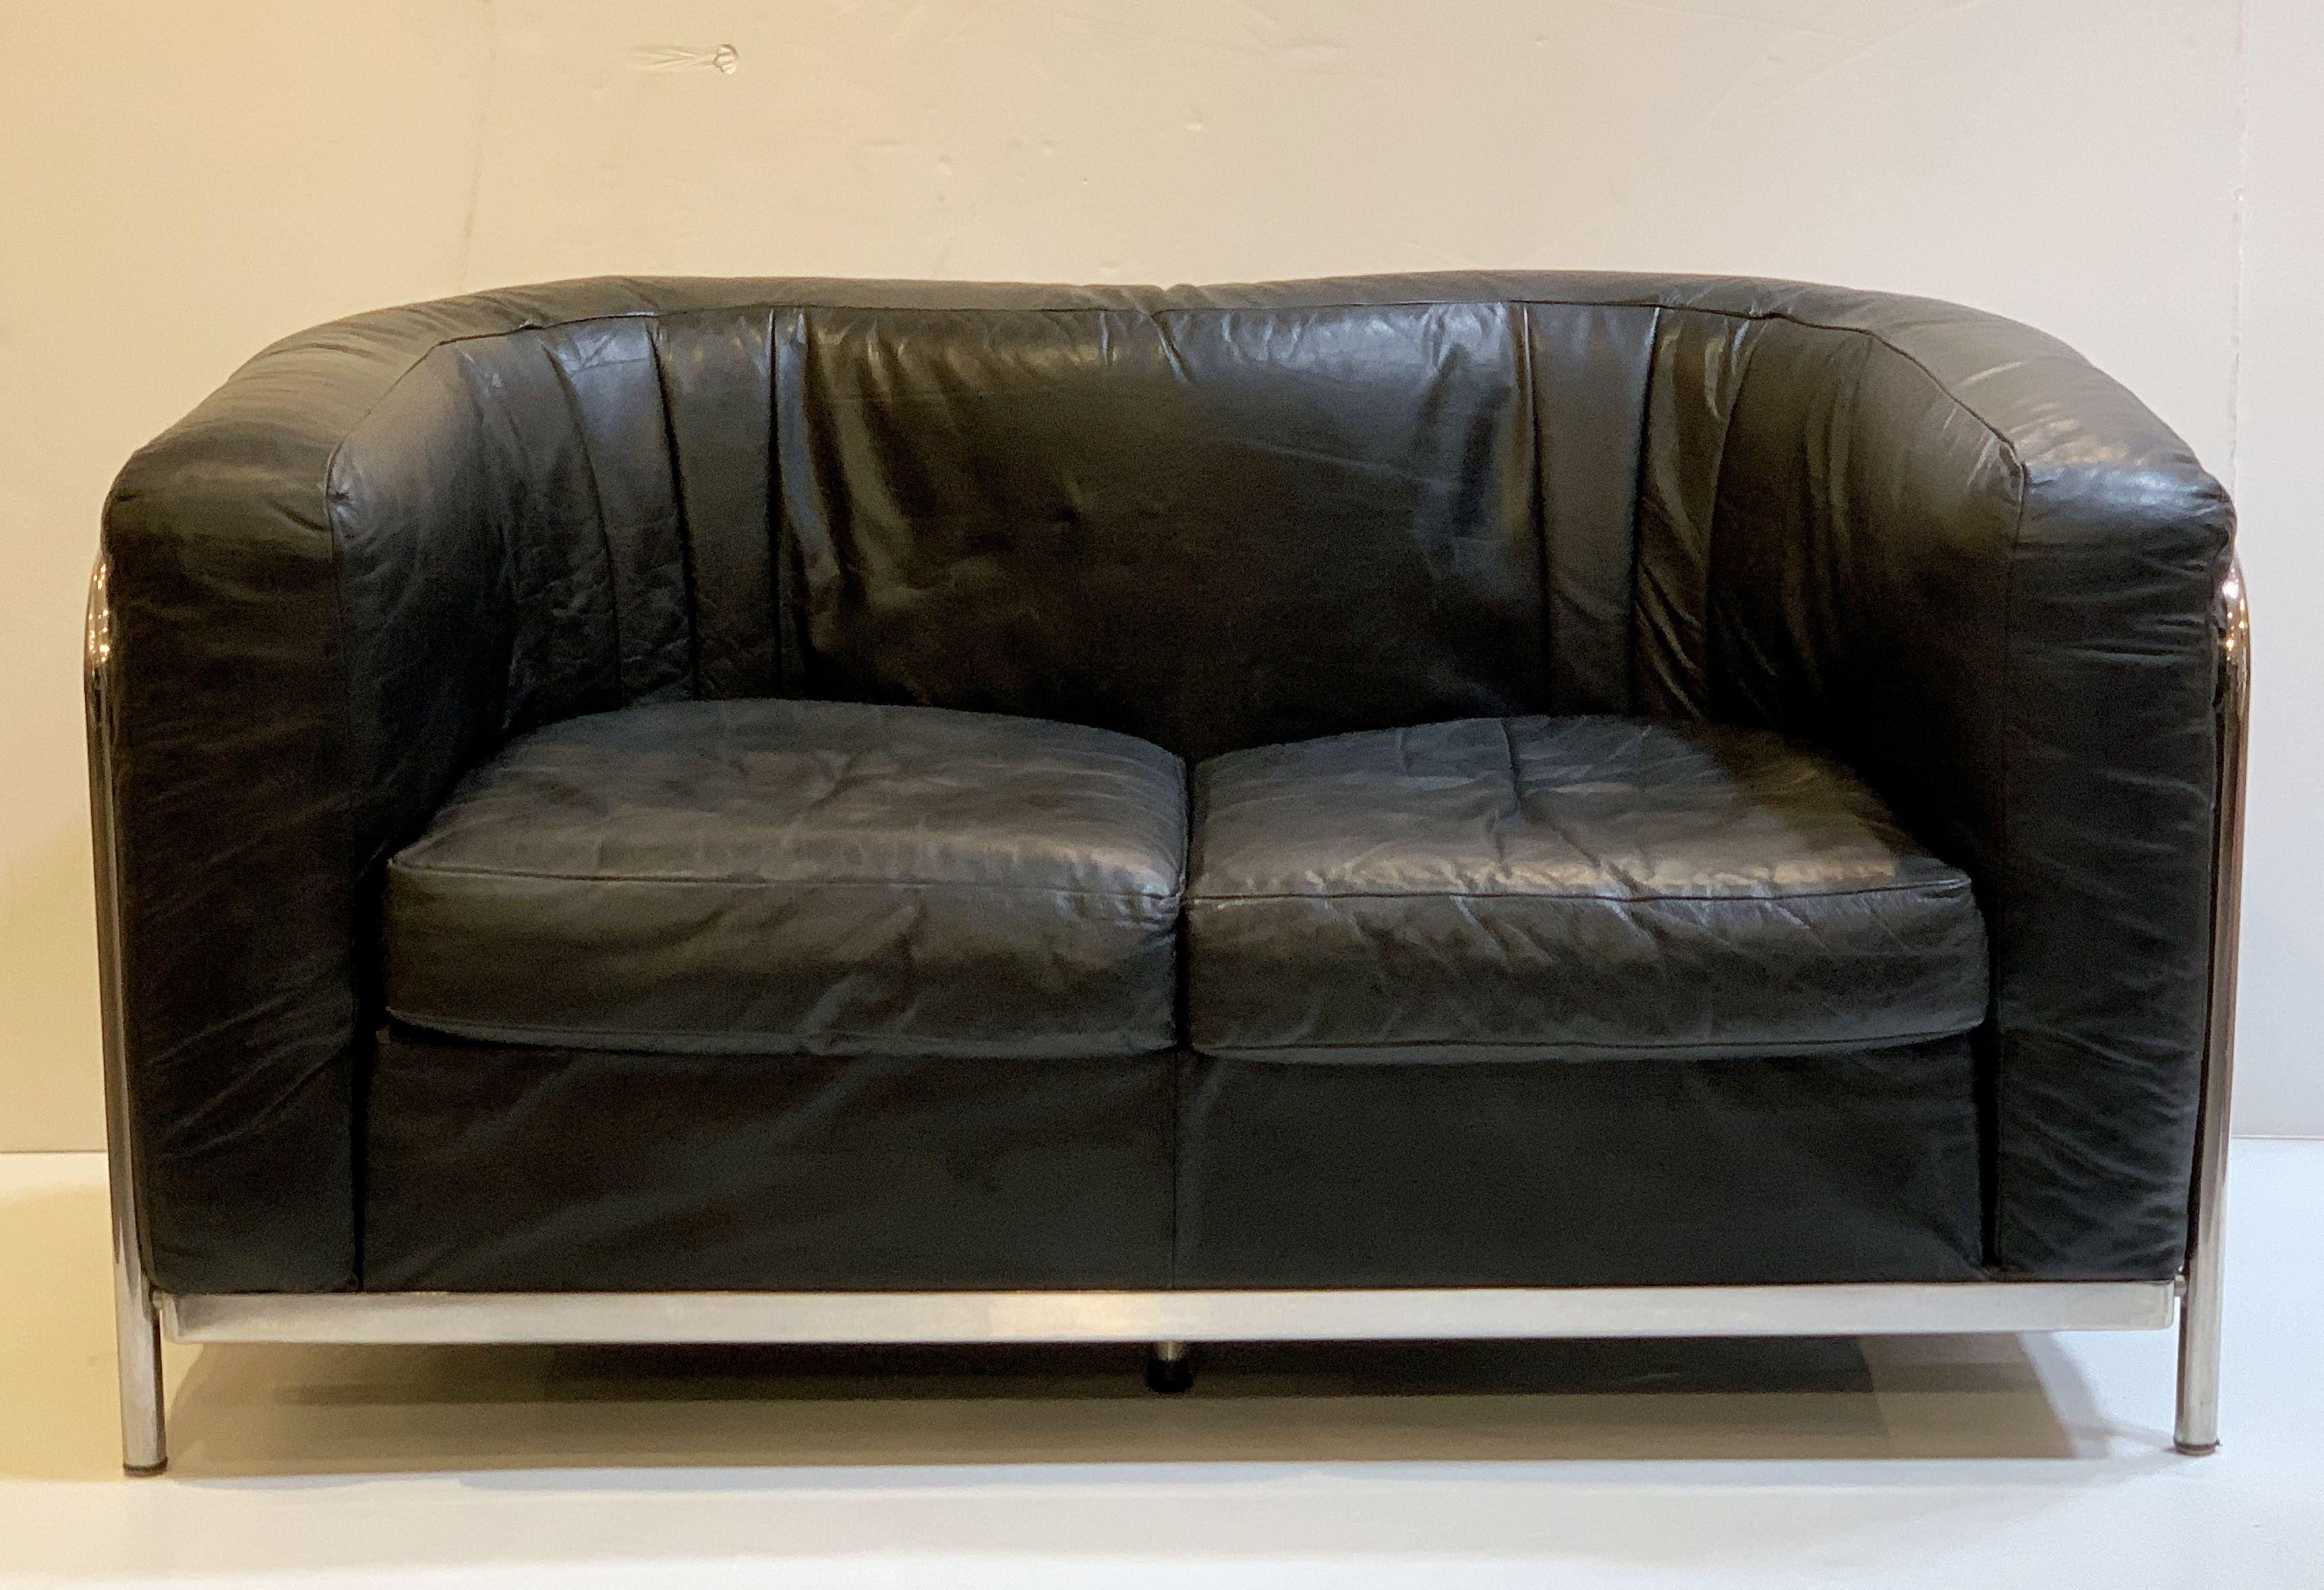 A fine, comfortable Italian sofa in the Modern style, featuring a stylish, bowed tubular chrome body with upholstered cushion back and sides of black leather, two fitted seat cushions of black leather, and resting on chrome feet.

The Zanotta